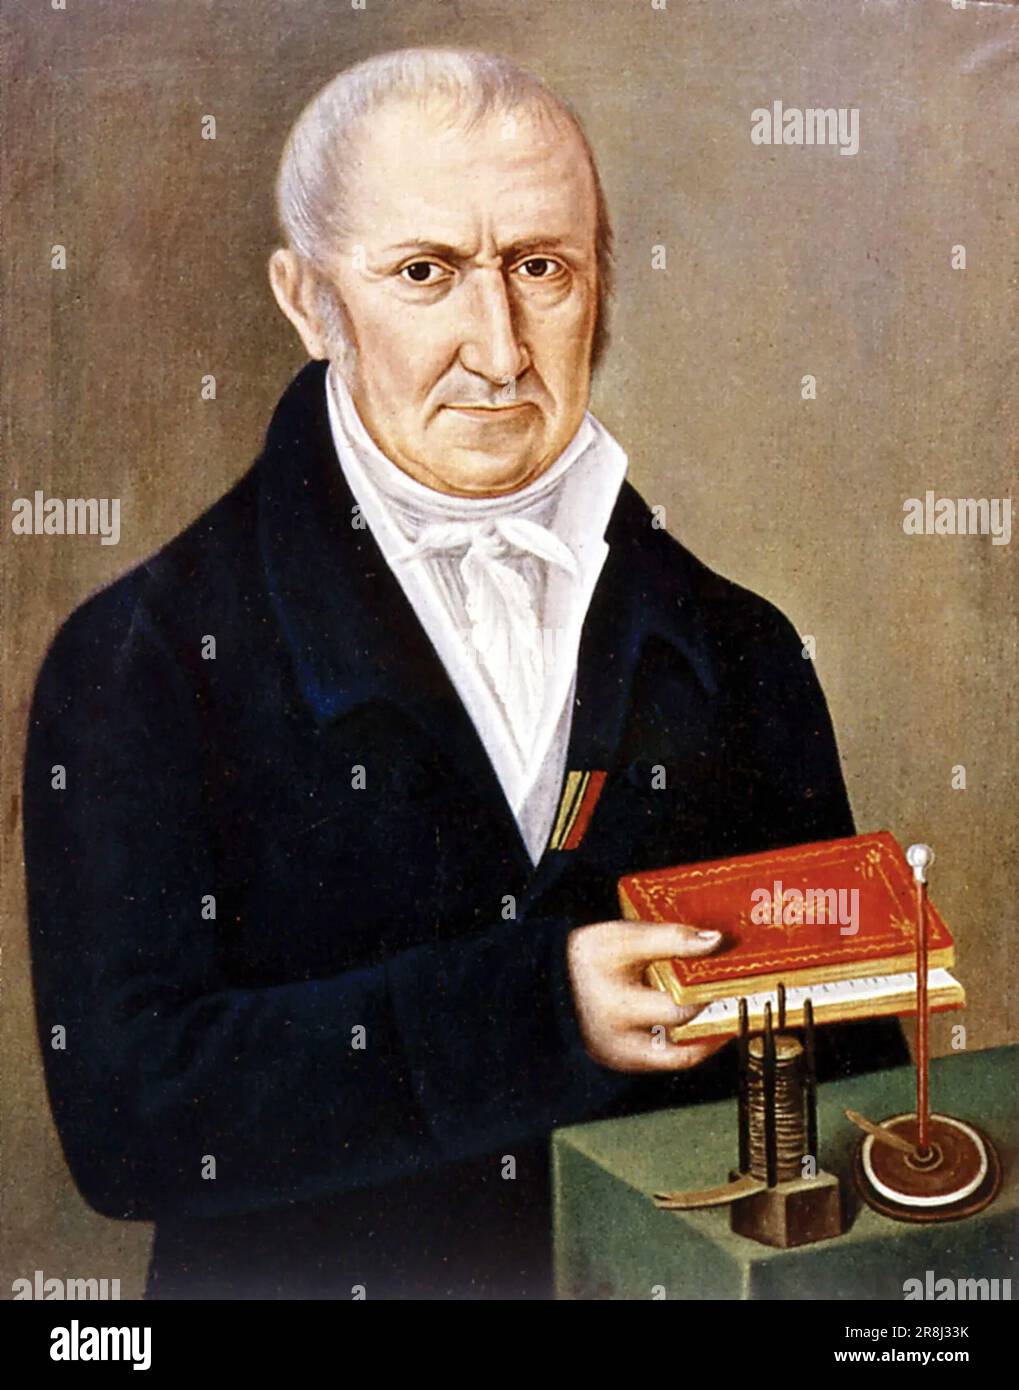 Alessandro Giuseppe Antonio Anastasio Volta (1745 – 1827) Italian physicist and chemist, pioneer of electricity and power, inventor of the electric battery and the discoverer of methane. Stock Photo